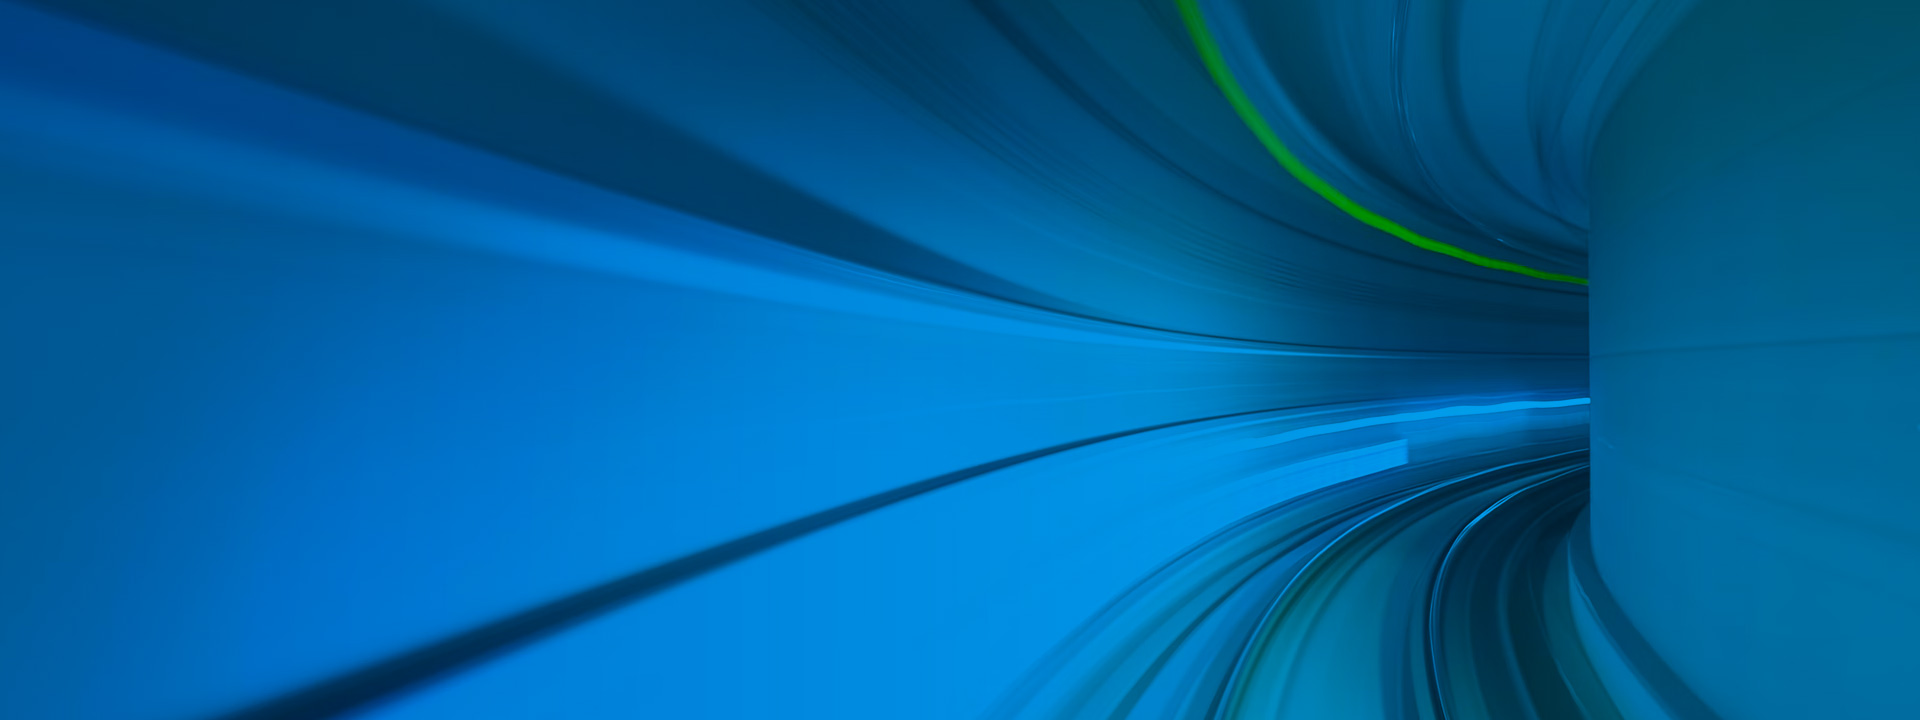 KDD 2022 event header - abstract blue